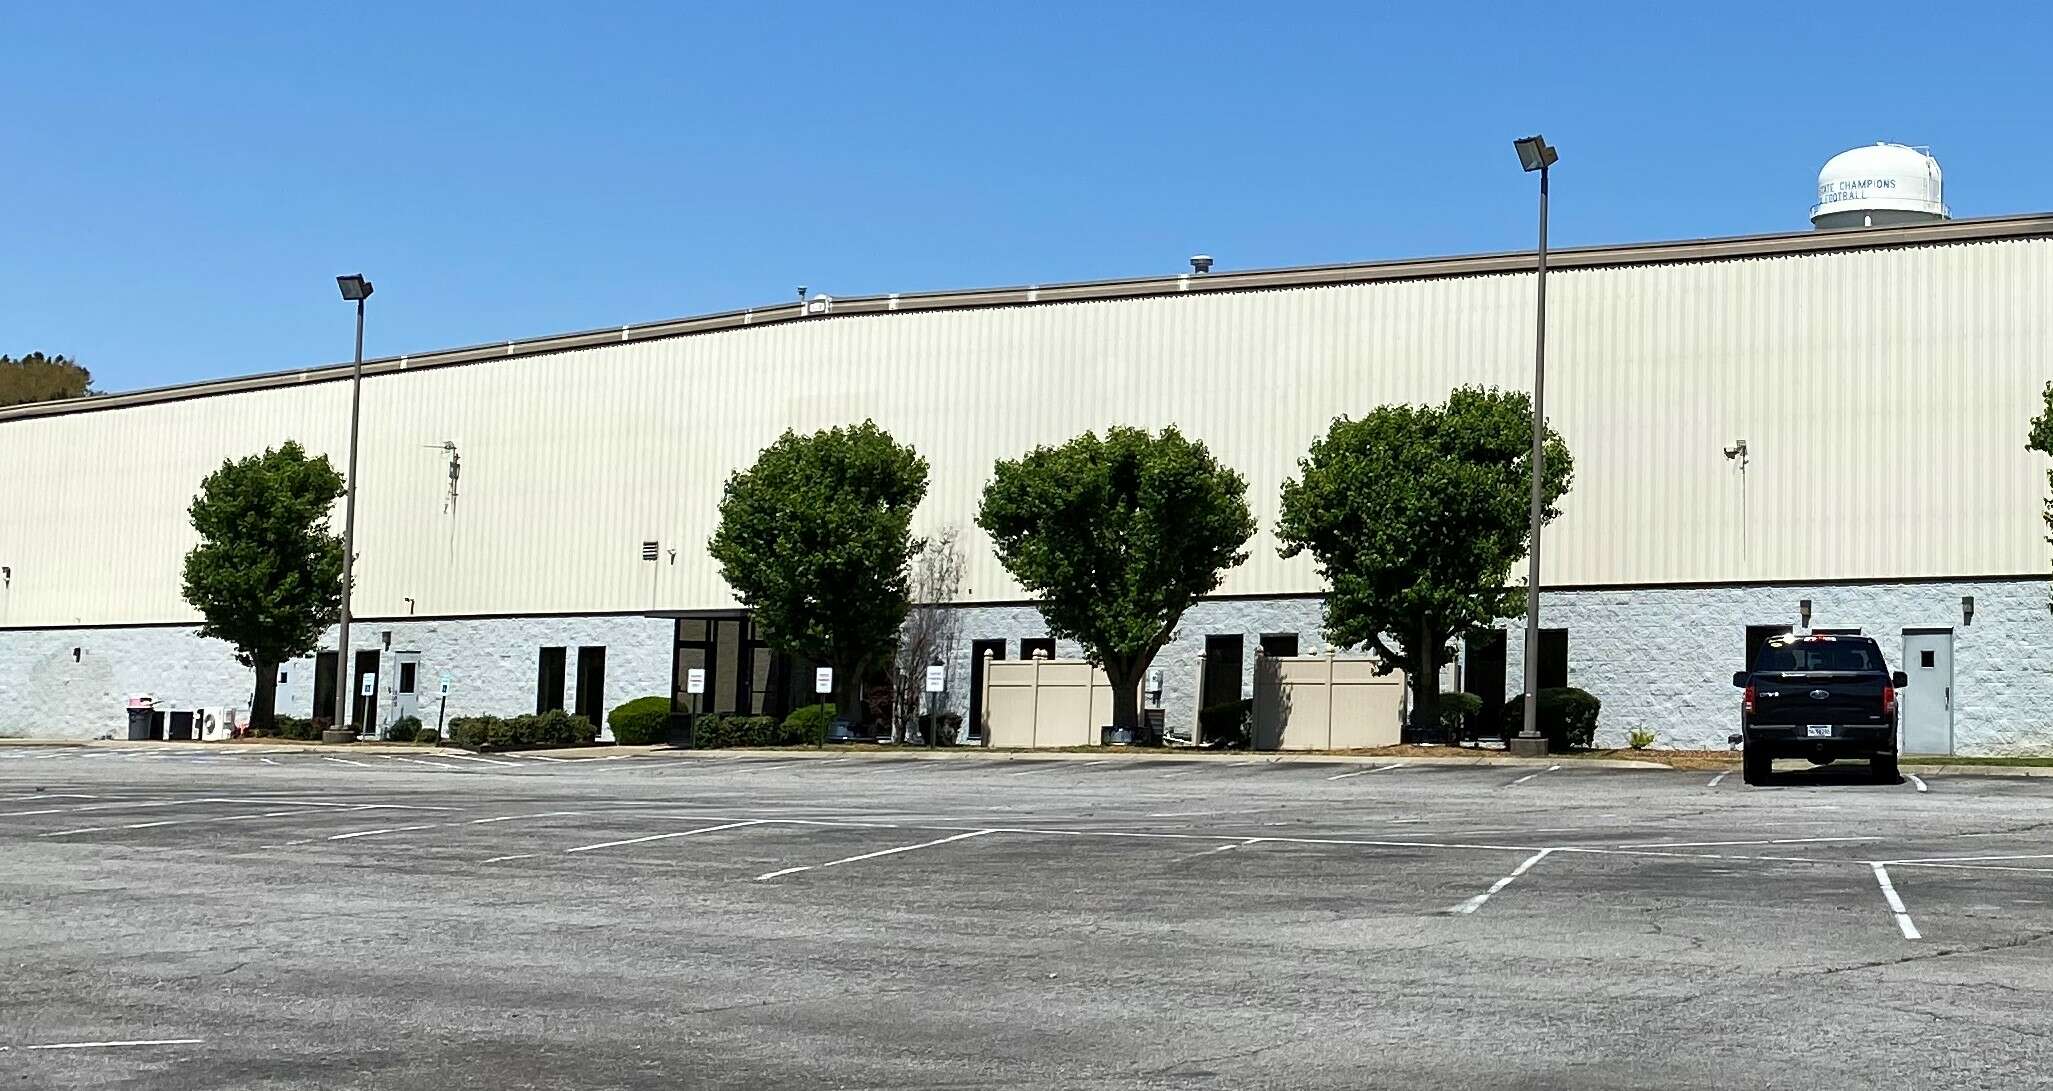 A very large manufacturing building with a faux stone lower level painted white and corrugated metal upper level, some doors but no windows, and trees along the walls